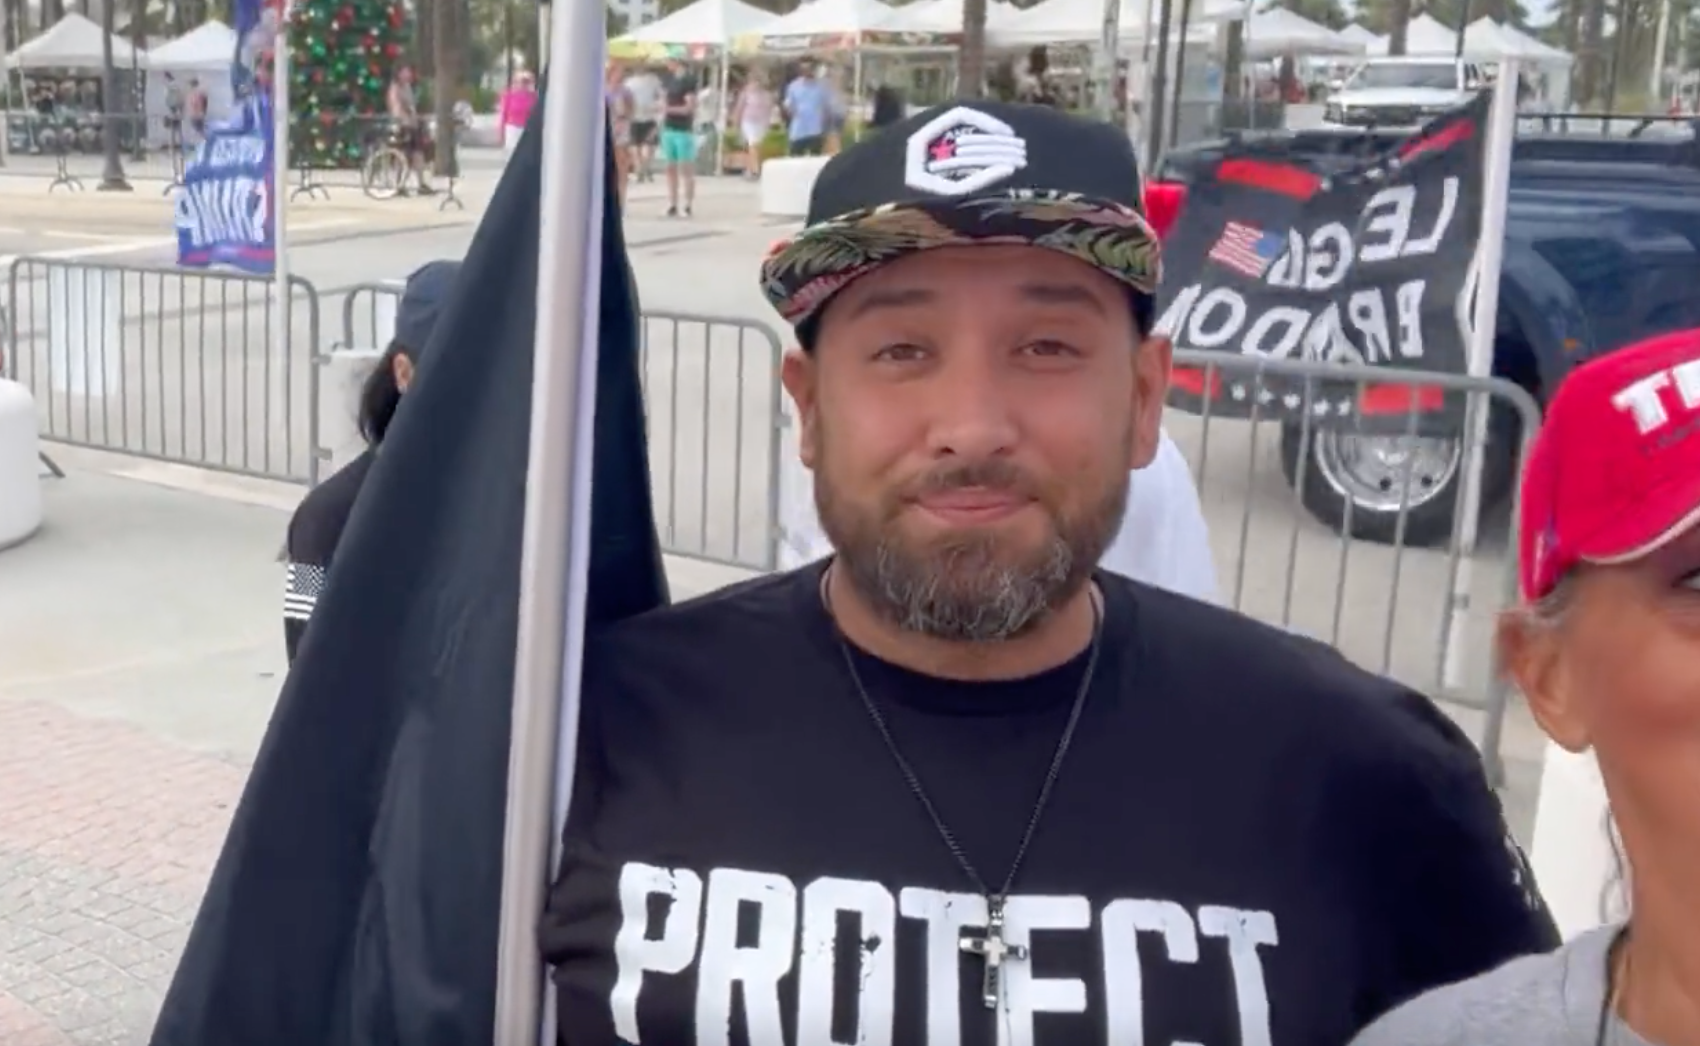 Gays Against Groomers spars with counterprotestors during its anti-LGBTQ+ rally in Florida